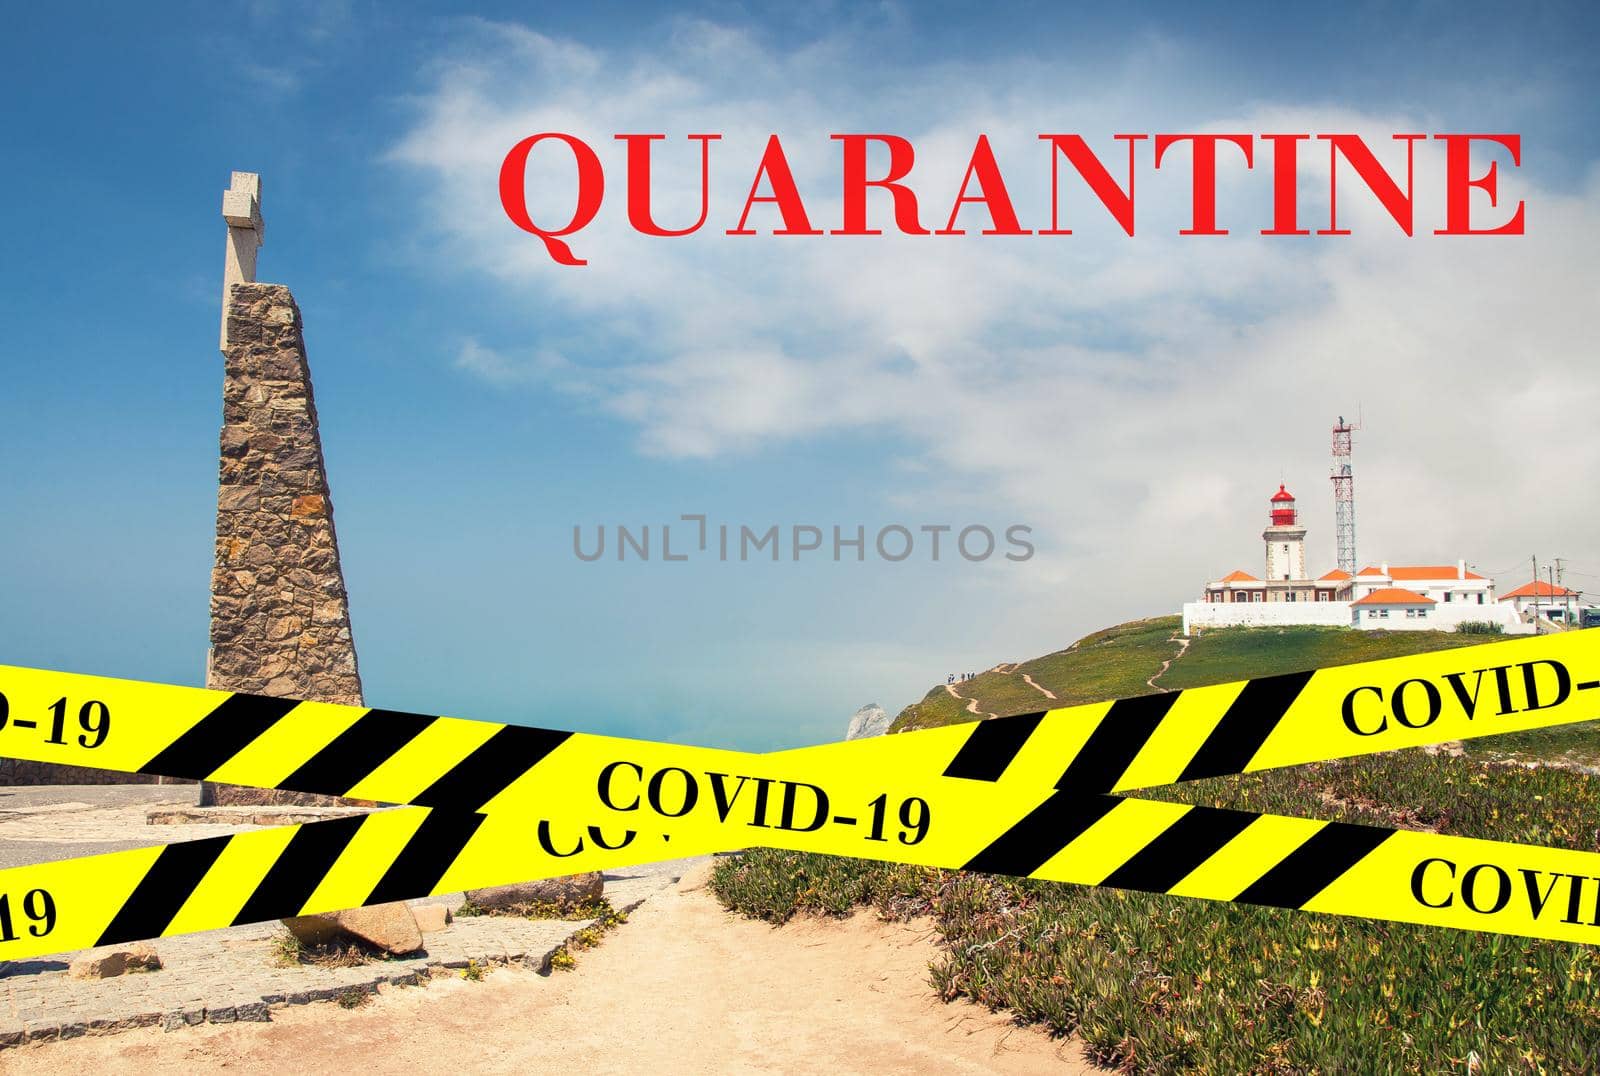 Quarantine in Portugal. Cape Roca Cabo da Roca - westernmost point of Eurasia. No travel and lockdown concept. Coronavirus outbreak Covid-19 pandemic concept. Canceled tourist vacation. Barrier tape.